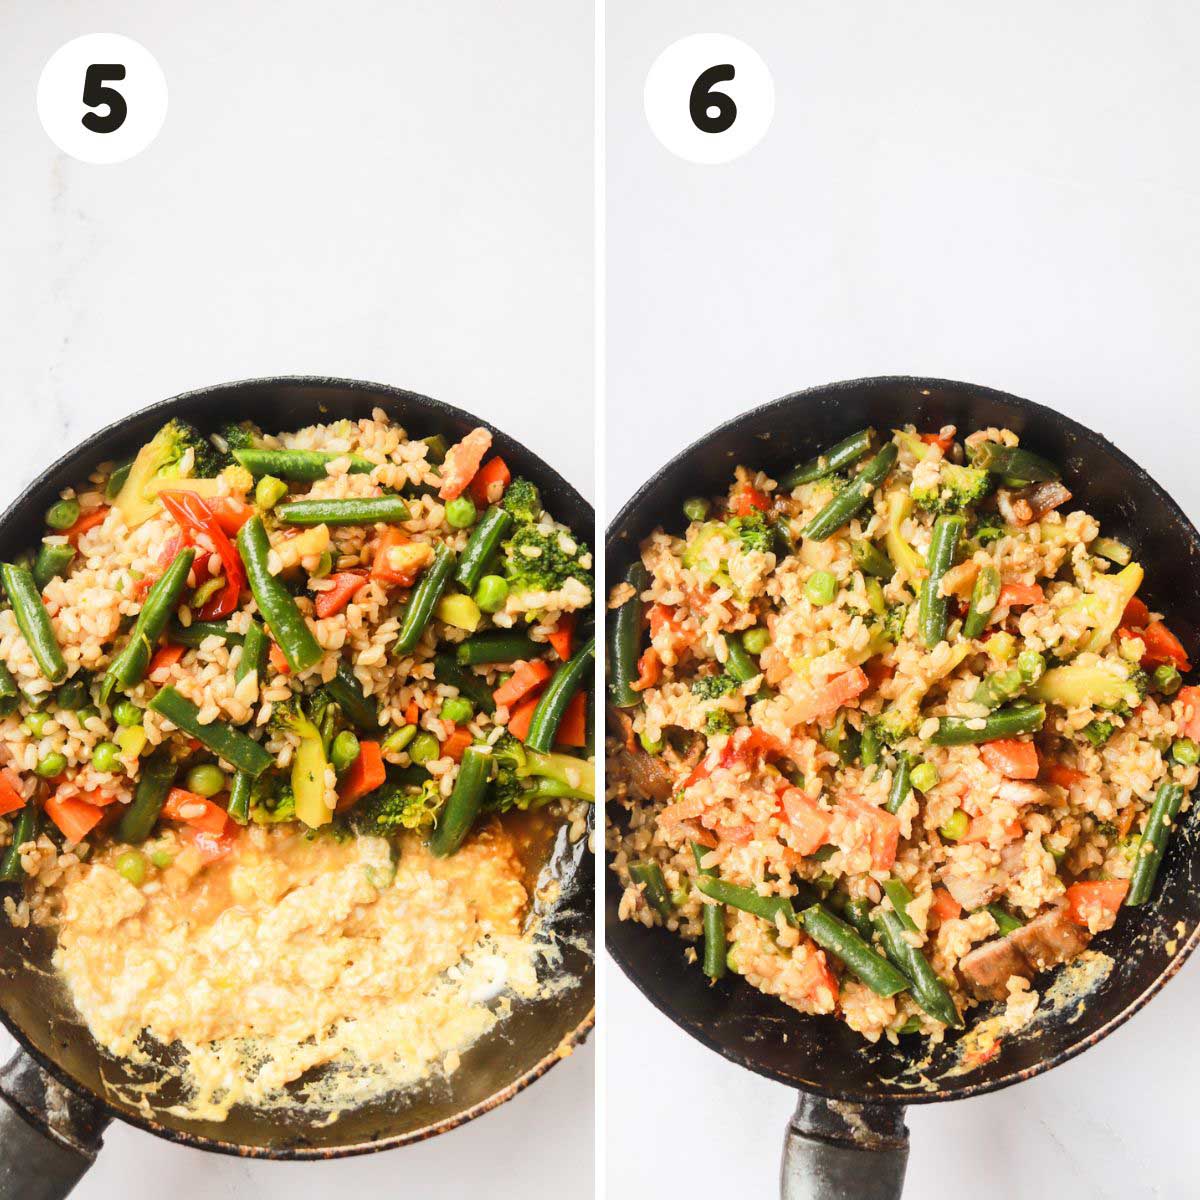 Steps to cook the fried rice.